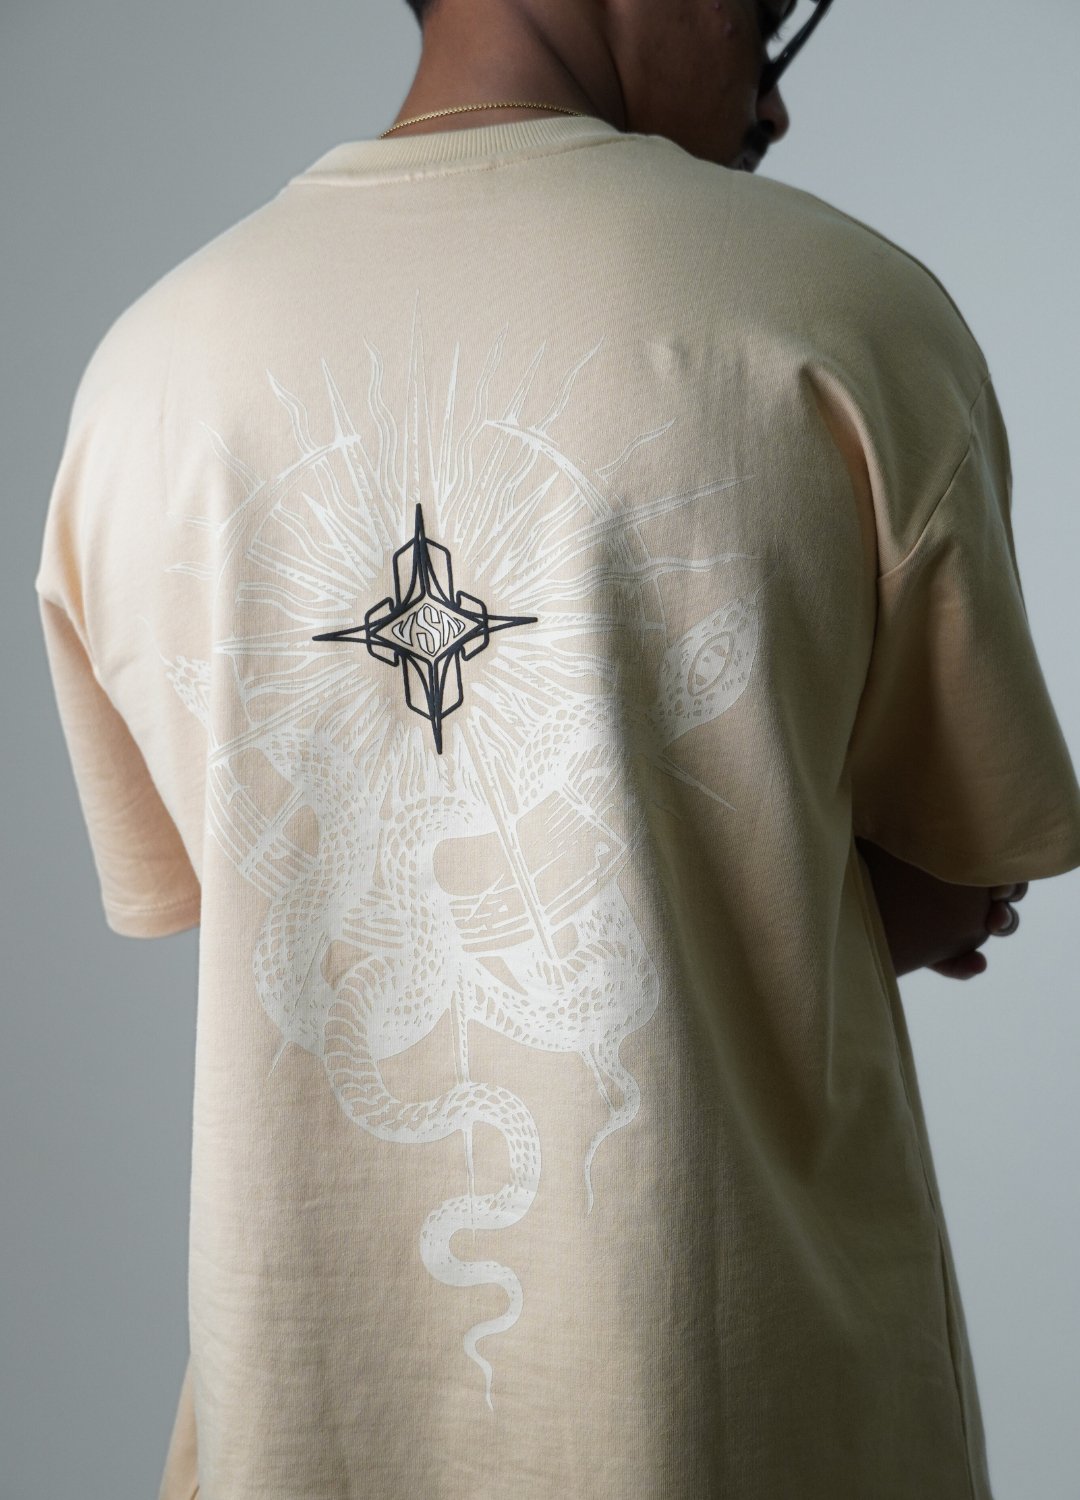 Cosmic Serpent tee (Oversized Tshirts) by Ripoff